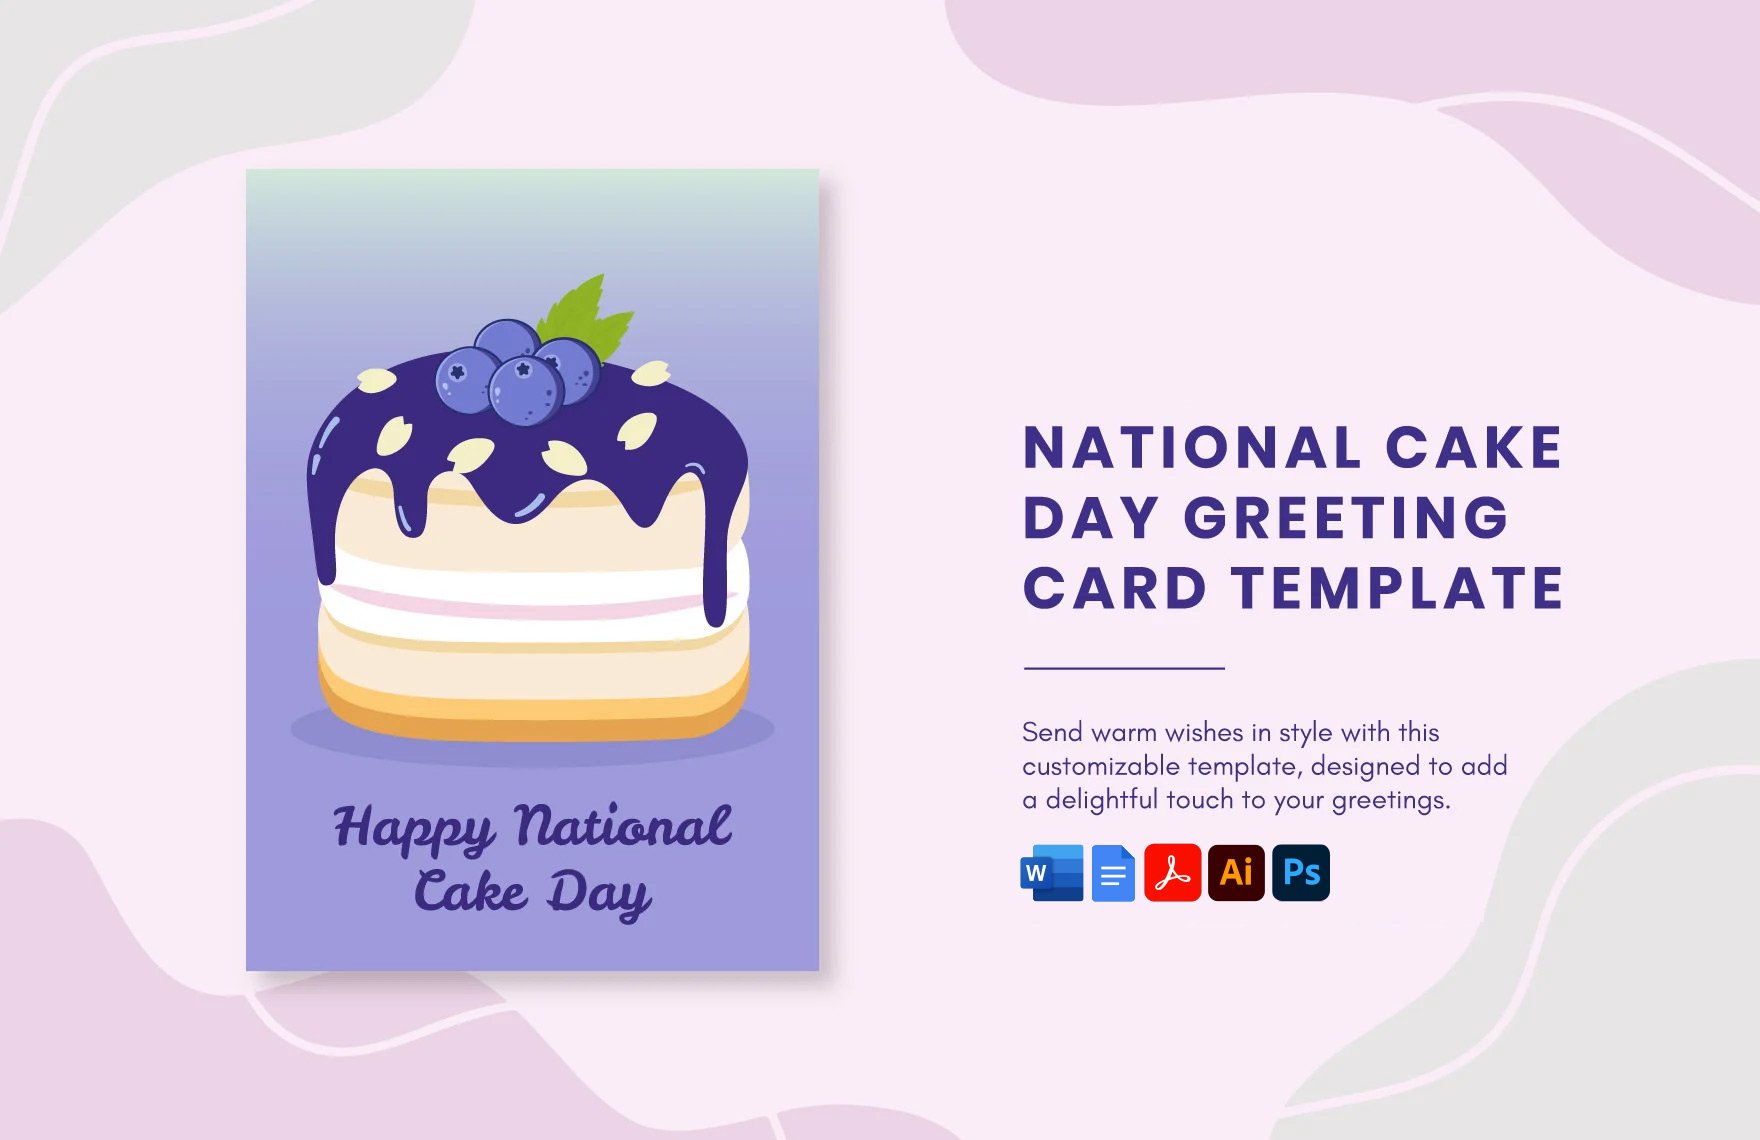 Free National Cake Day Greeting Card Template in Word, Google Docs, PDF, Illustrator, PSD